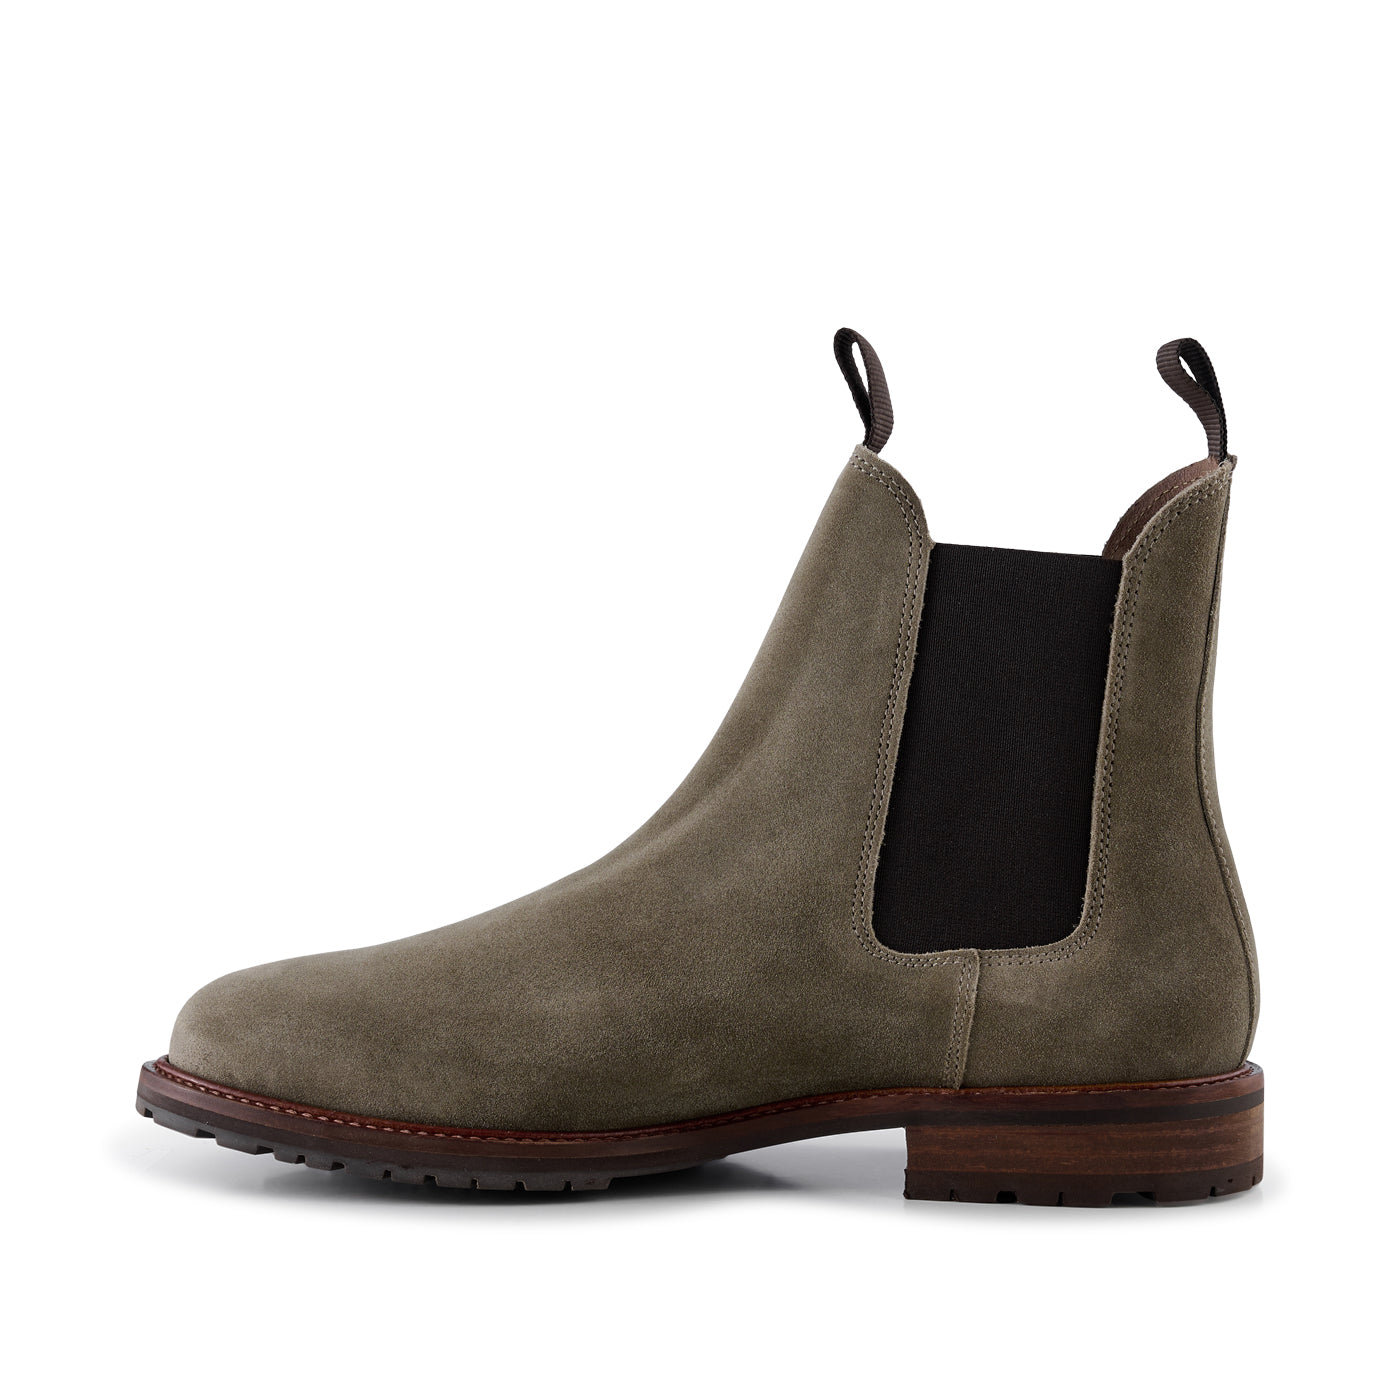 Krudt Stolthed hver York chelsea boot suede - KHAKI – SHOE THE BEAR - US